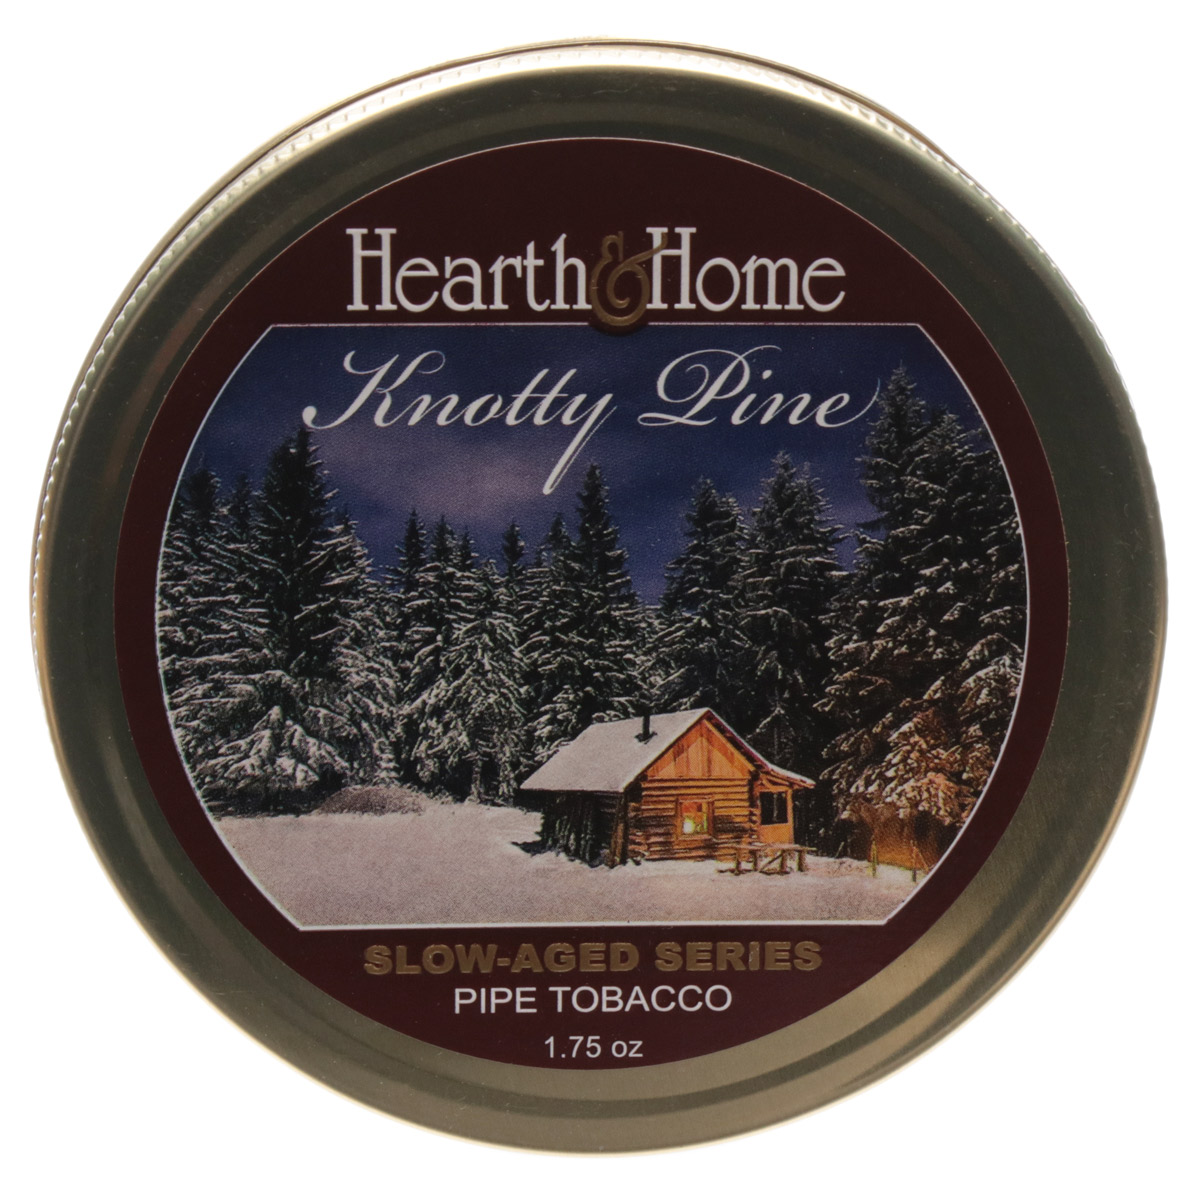 Hearth and Home Knotty Pine 1.75oz